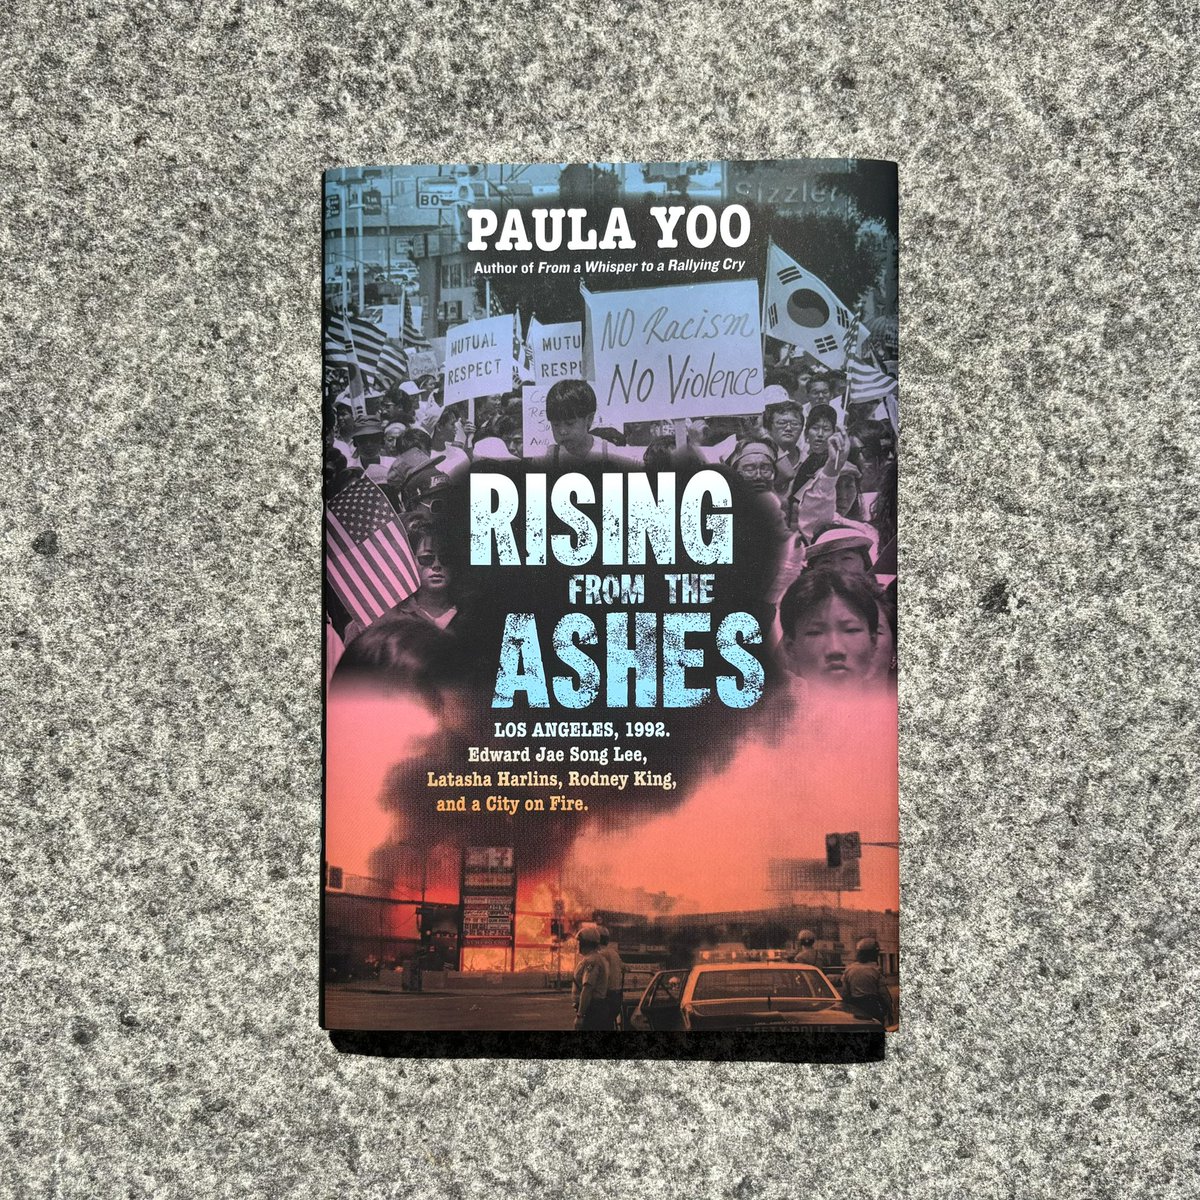 Happy #BookBirthday to RISING FROM THE ASHES by @PaulaYoo! 👏🔥 Thoroughly researched and thoughtfully recounted, Yoo’s newest nonfiction is a must-read for understanding protest movements past and present. For ages 12+. wwnorton.com/books/97813240…